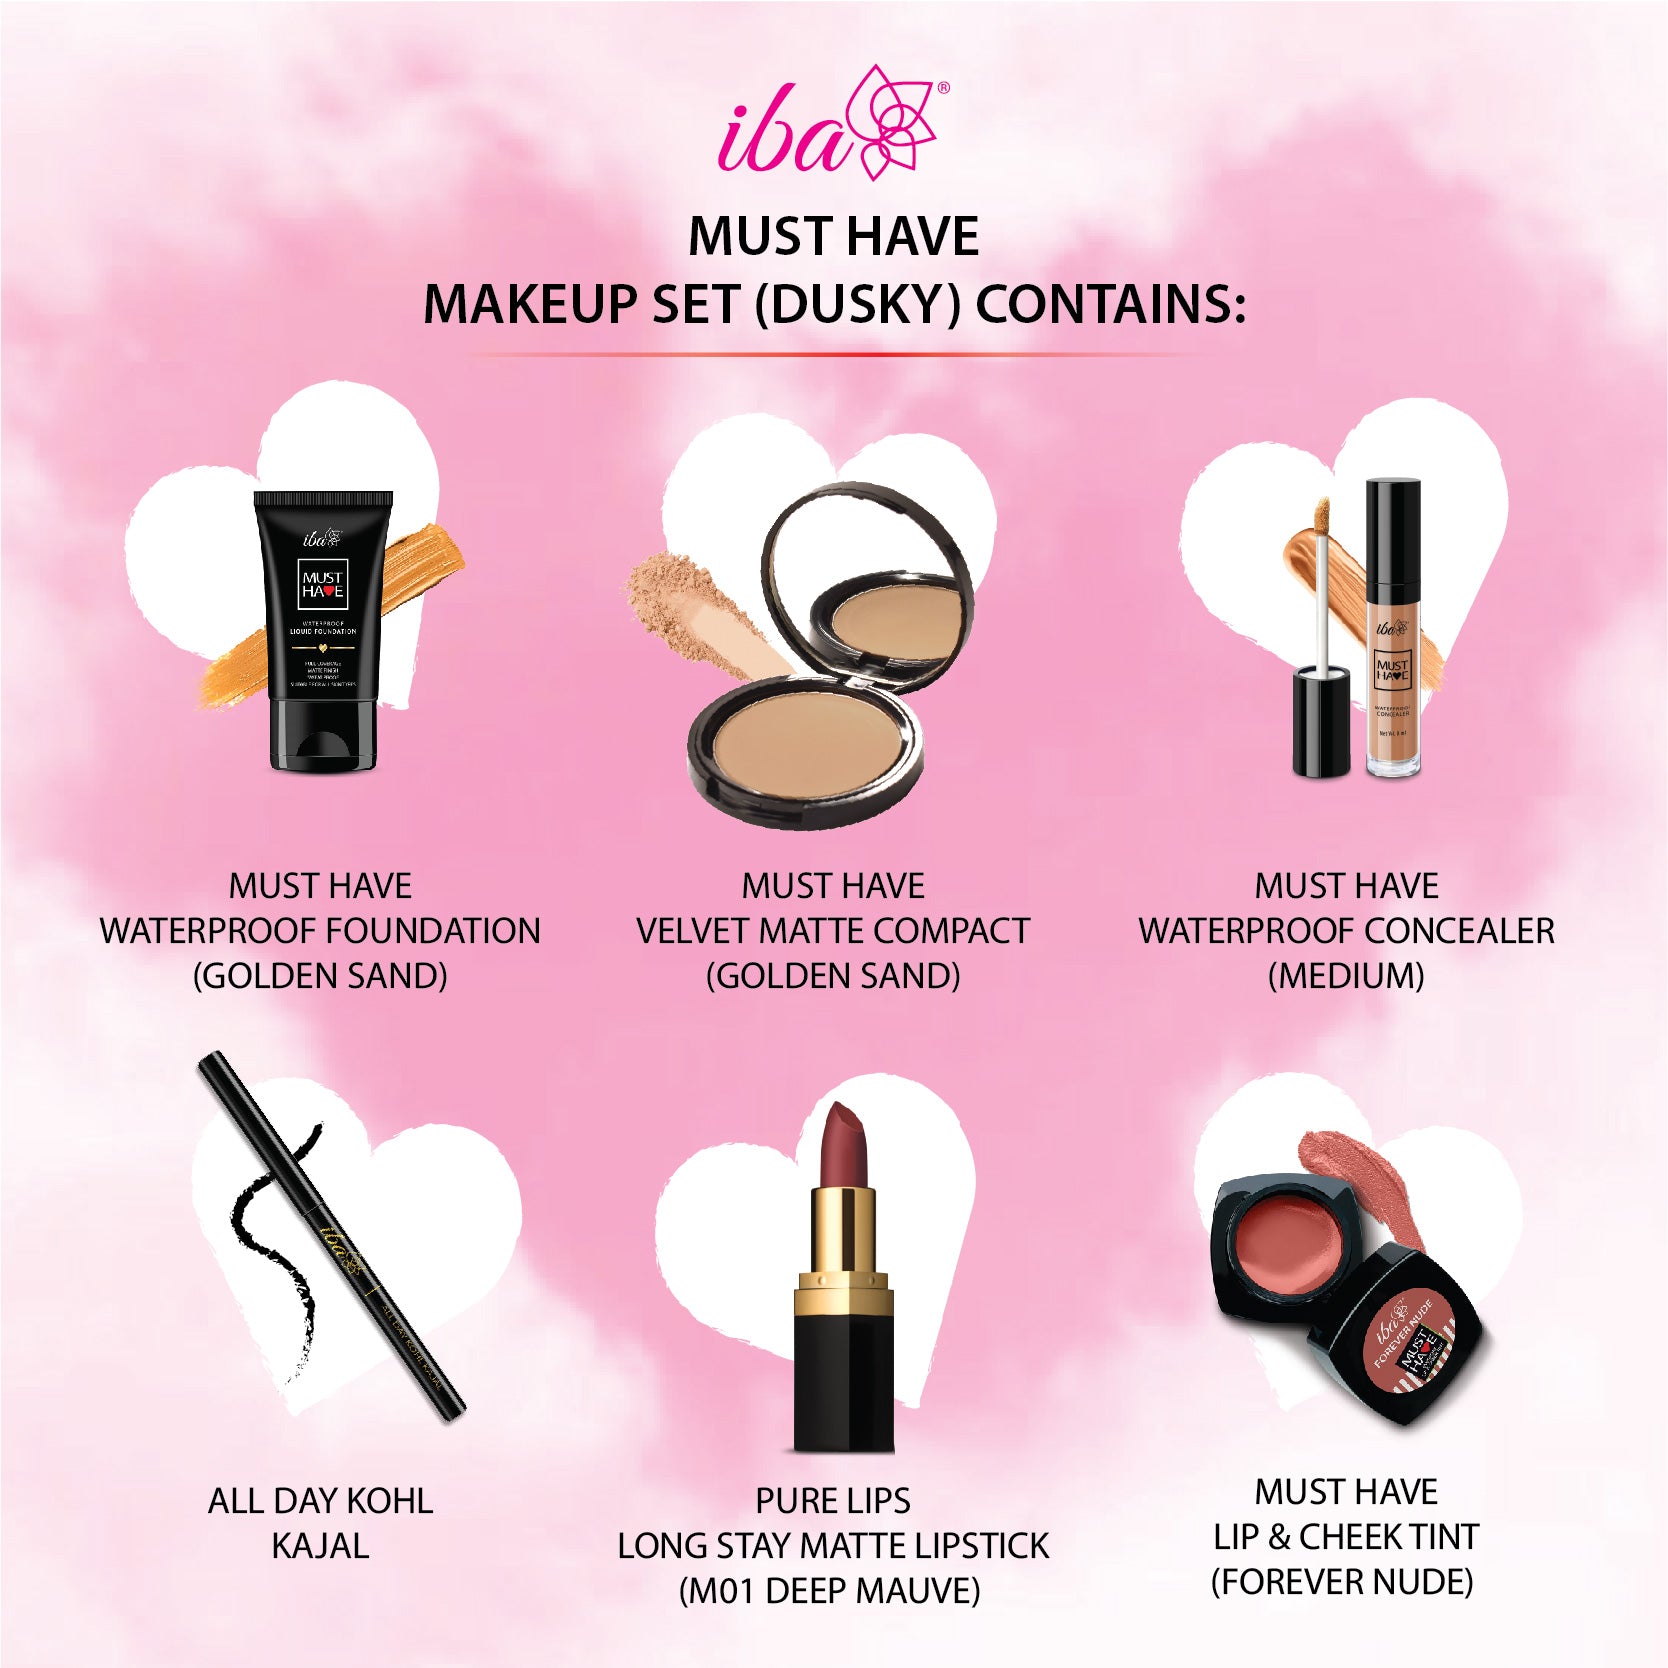 List Of Products In Iba Makeup Set - Dusky